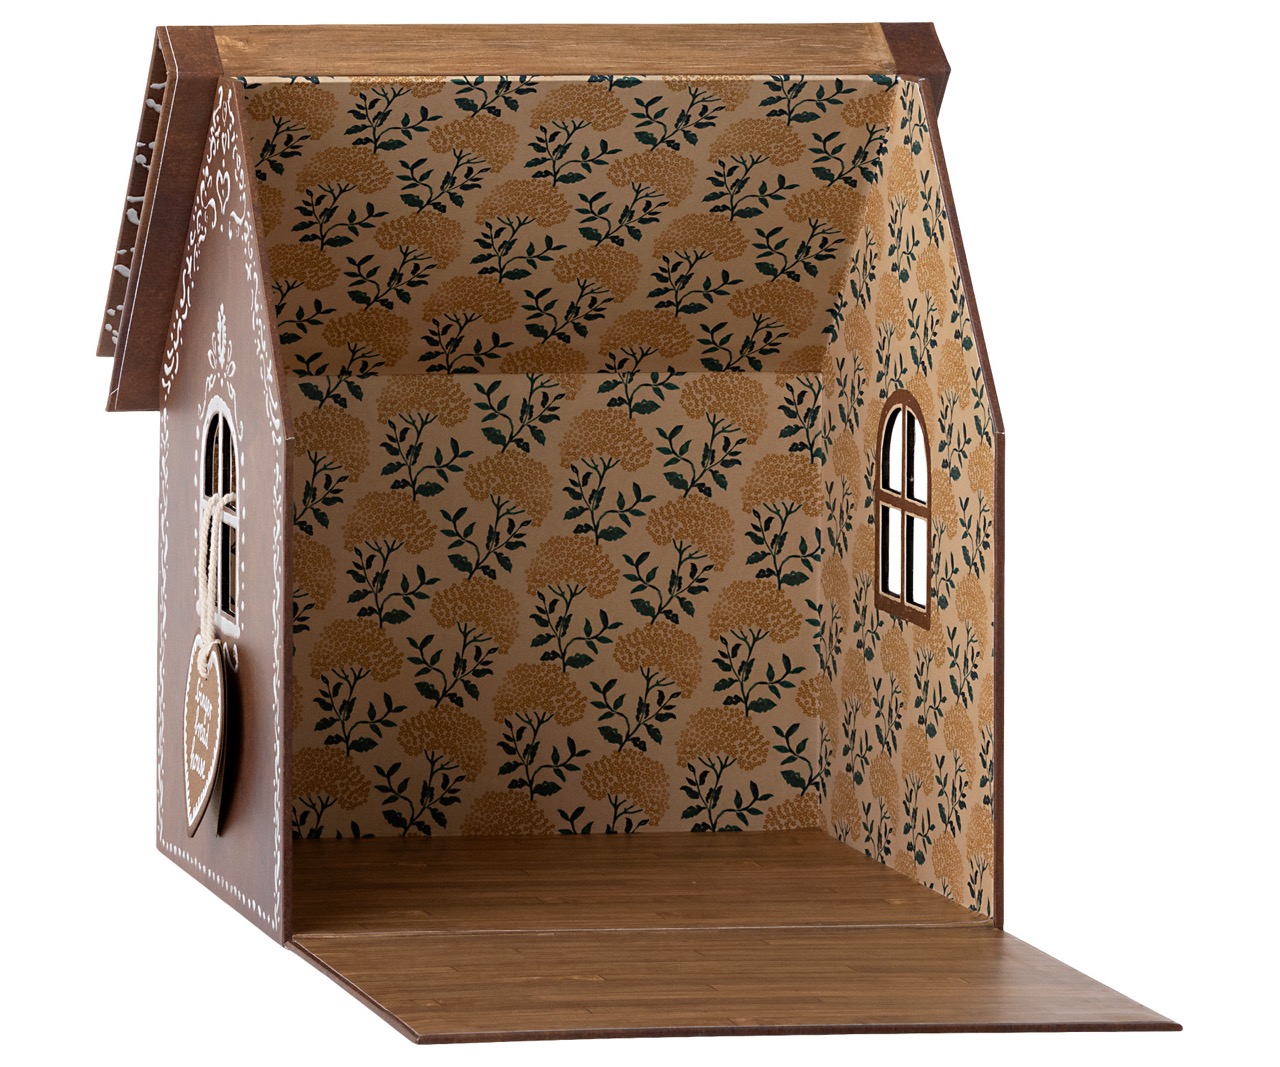 maileg gingerbread house - small